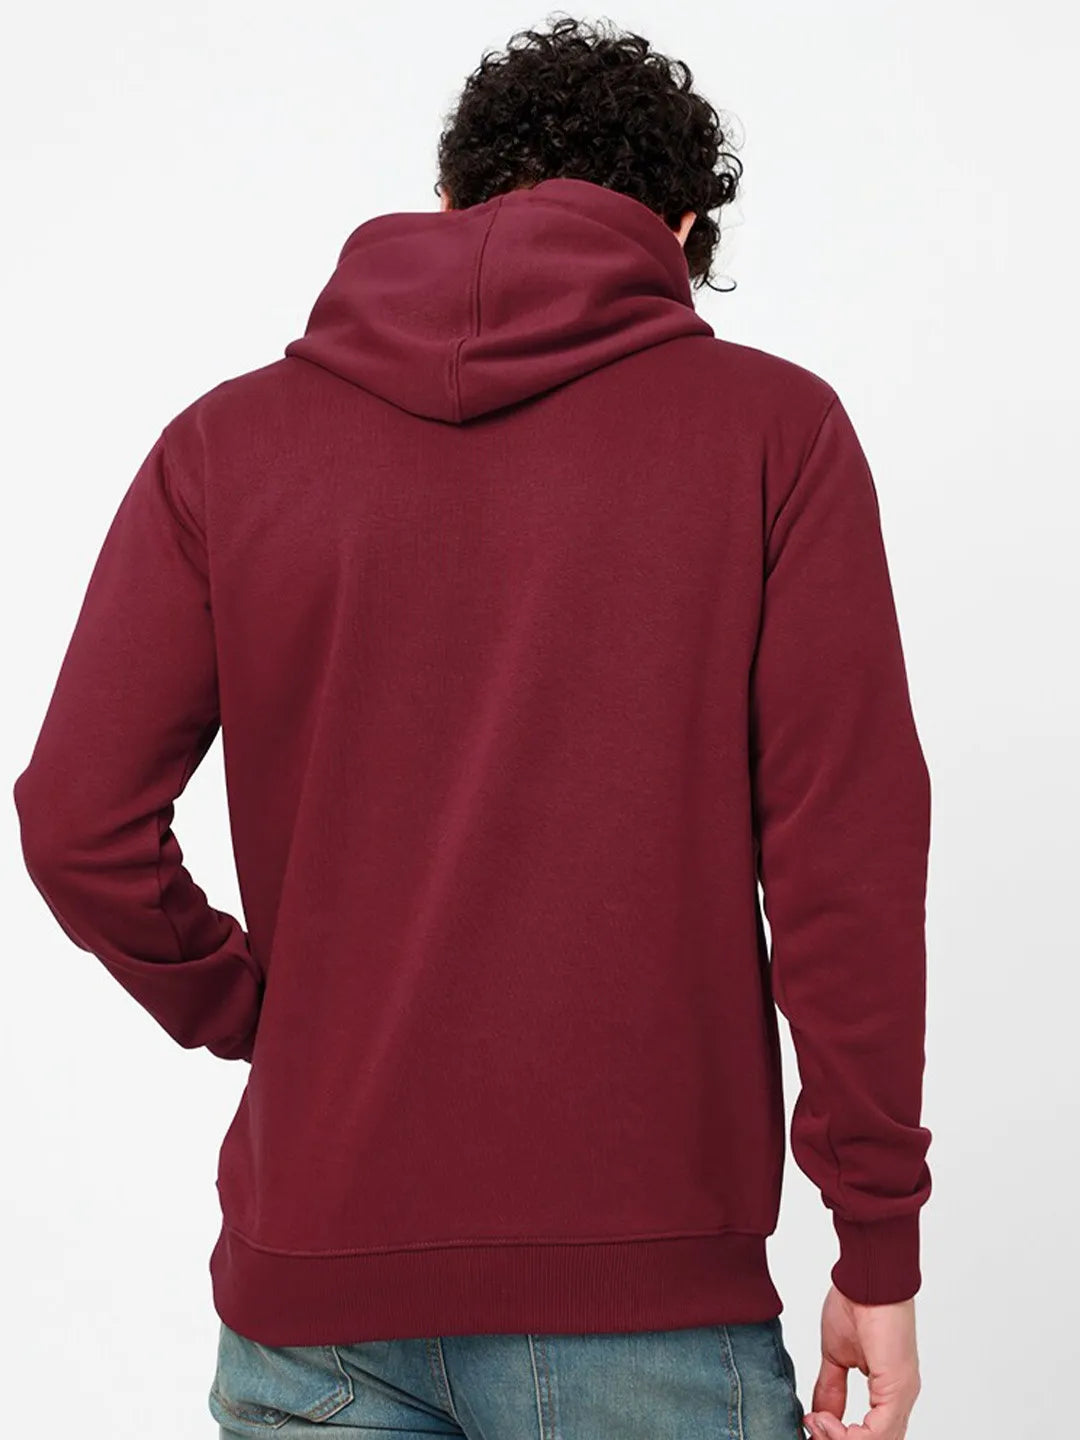 Masterful Maroon Color Cotton Hoodie For Men and Women (Unisex) Casual Full Sleeves